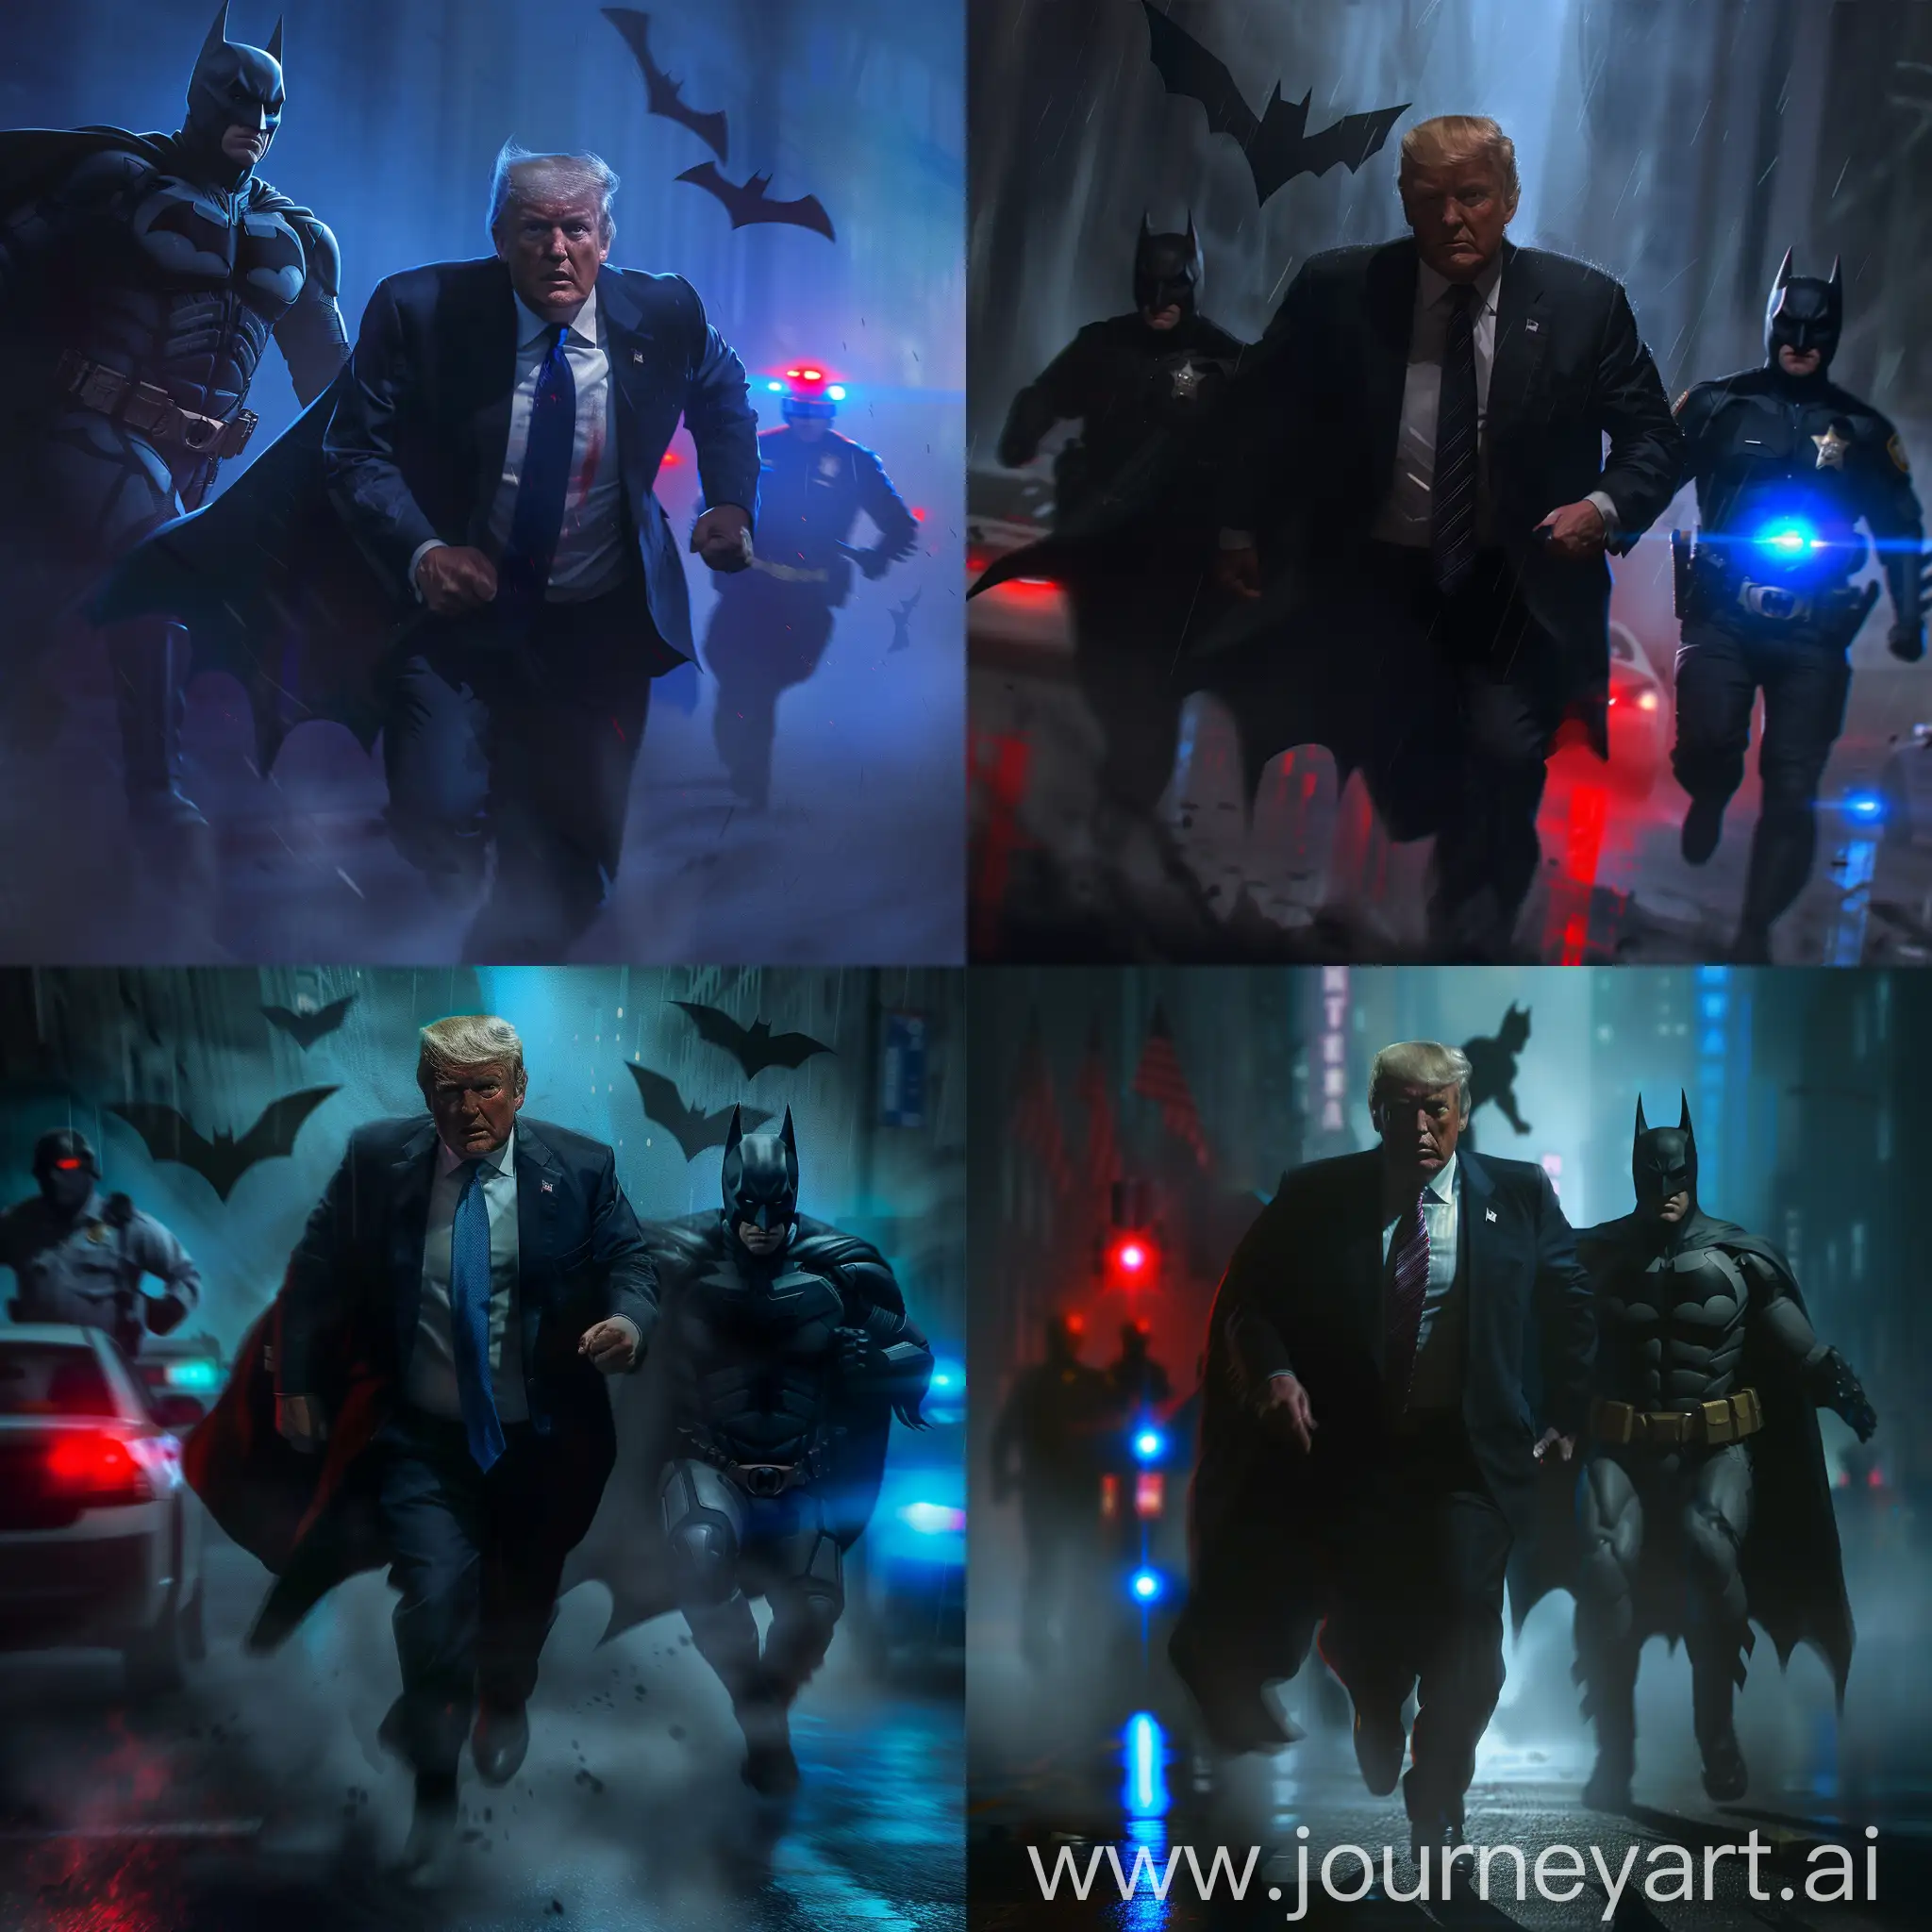 He is a well-known politician and entrepreneur who served as the President of the United States and was famous in the business world and television before that. He is known for his controversial views and direct behavior. On a dark and foggy night, he is running from the police and Batman. The terrifying shadows of Batman and the blue and red lights of the police are closing in on him. His sole aim is to escape from his relentless pursuers, and his past policies no longer matter.